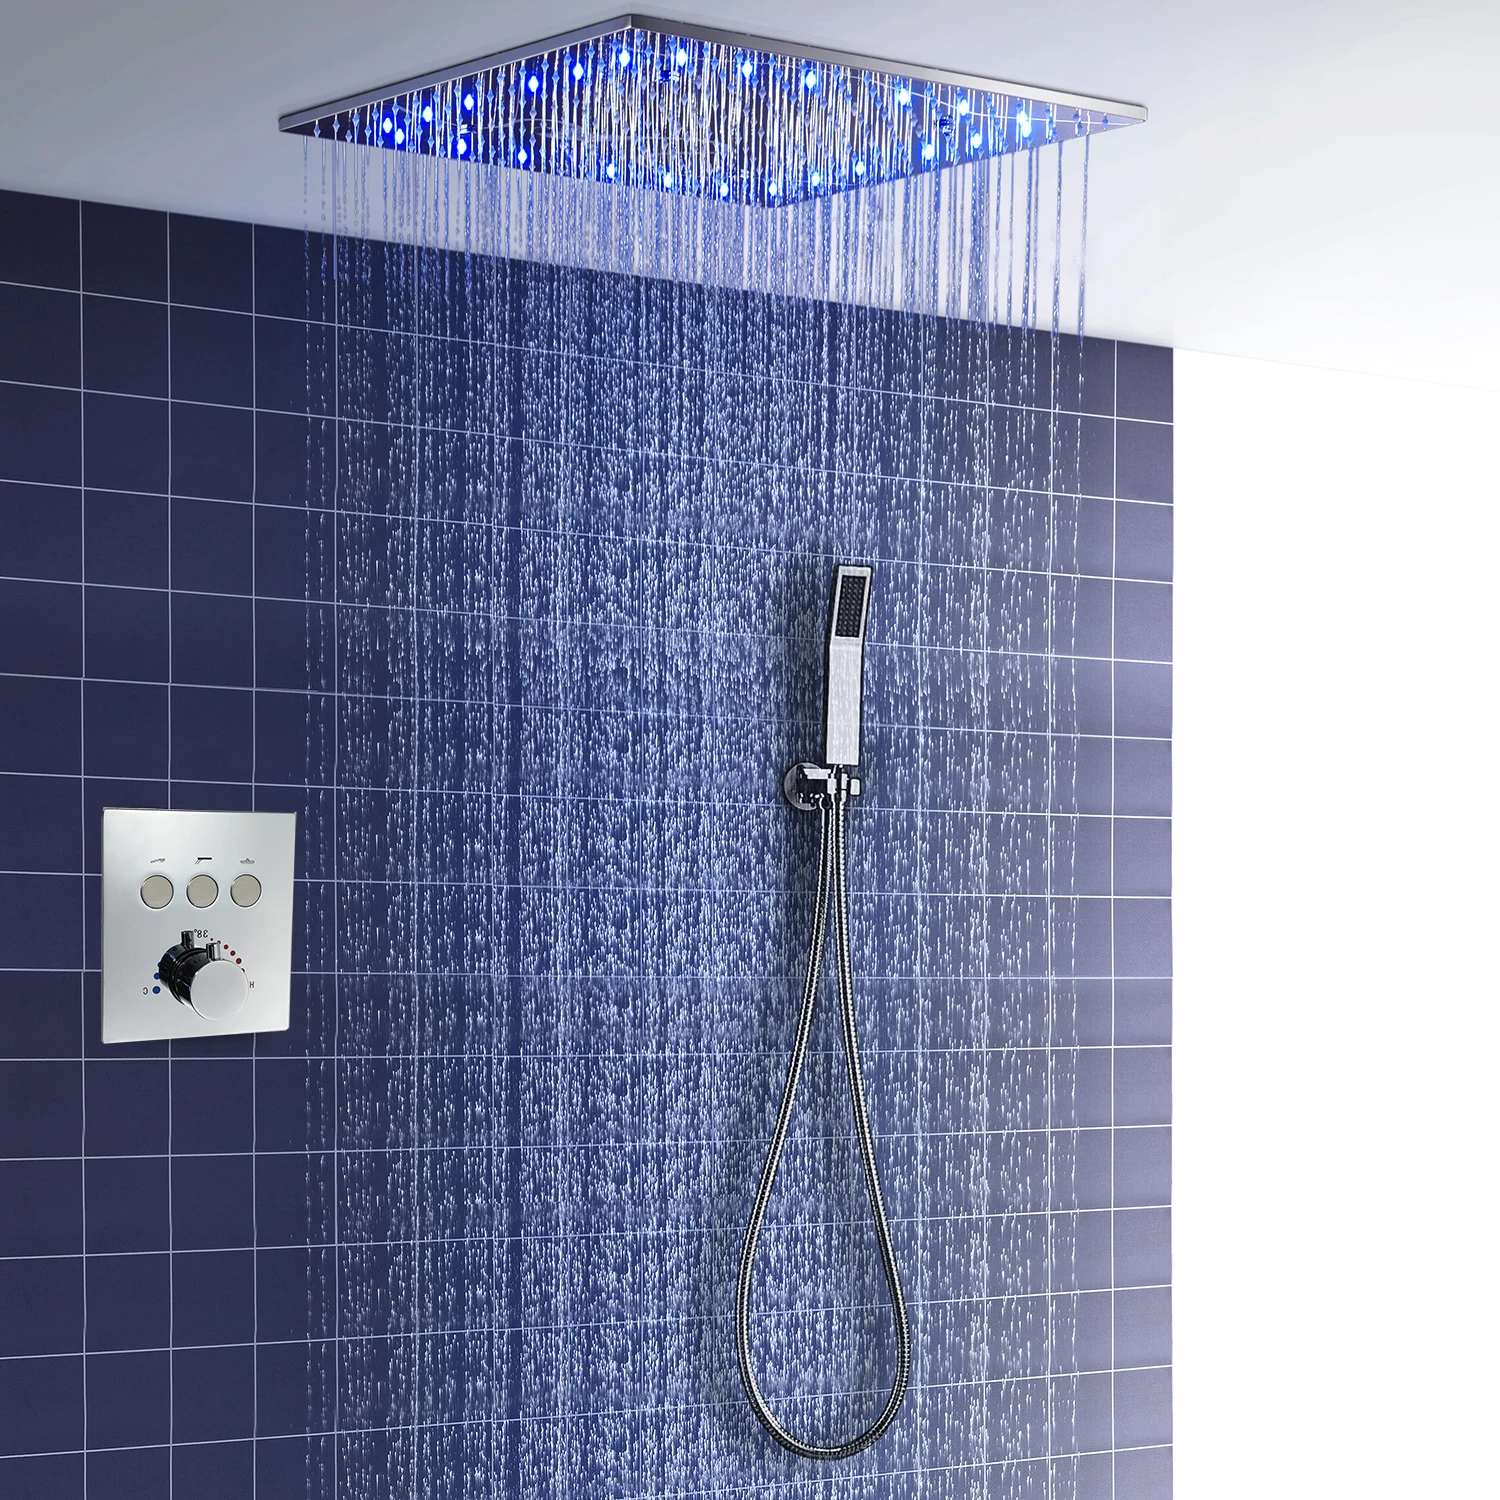 20 Inch Square Matte Black Ceiling Stainless Steel Rain Shower Head Mixer Faucet 